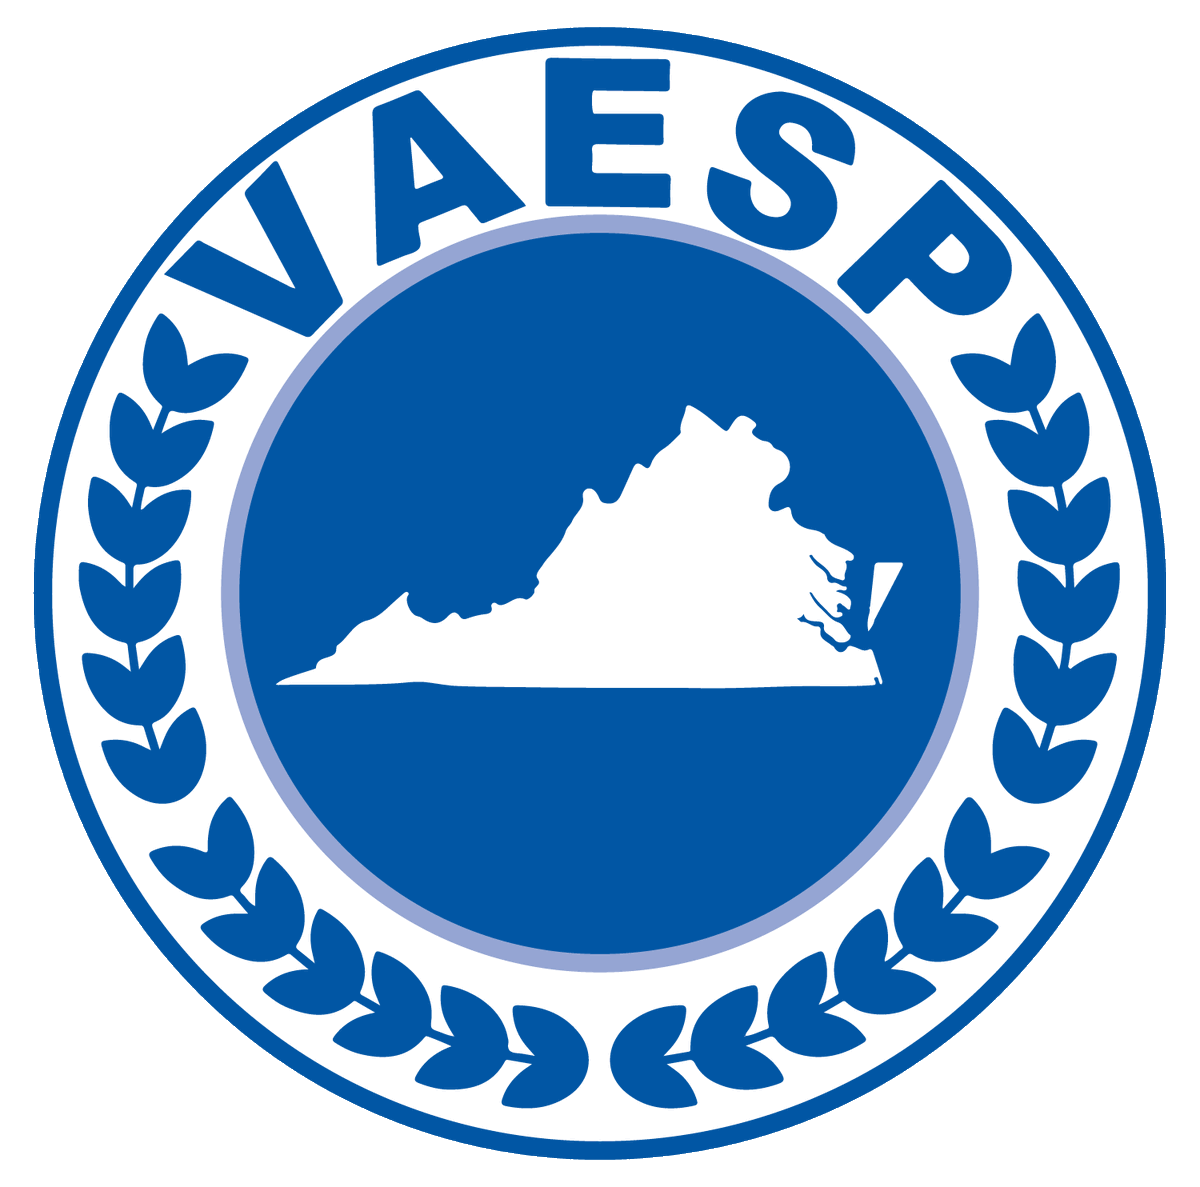 Join us at #VAESPChat, Sunday, Sept 10 at 8:00 pm. What is new and exciting at the VAESP? How can VAESP Advocate for School Leaders? What Legislation is on the horizon, State and Nationally? What Professional Development would you like to see provided to our members this year?